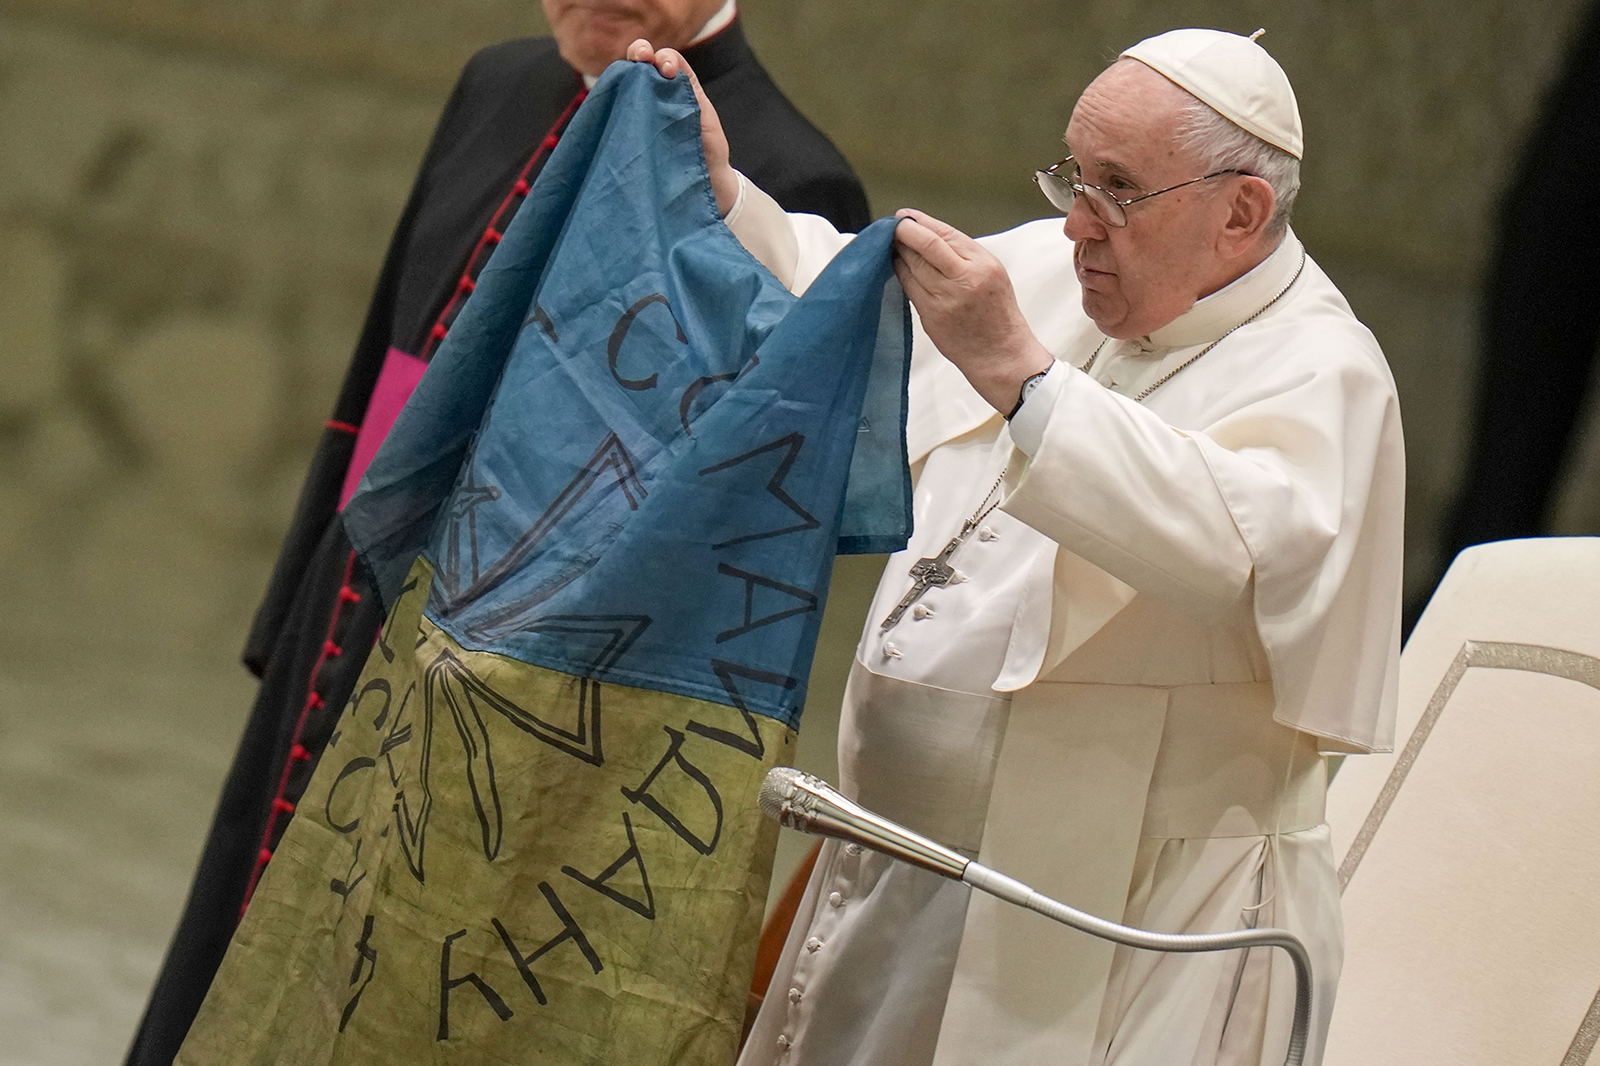 Pope Francis shows a flag that was brought to him from Bucha, Ukraine, during his weekly general audience in the Paul VI Hall, at the Vatican, April 6, 2022. (AP Photo/Alessandra Tarantino)